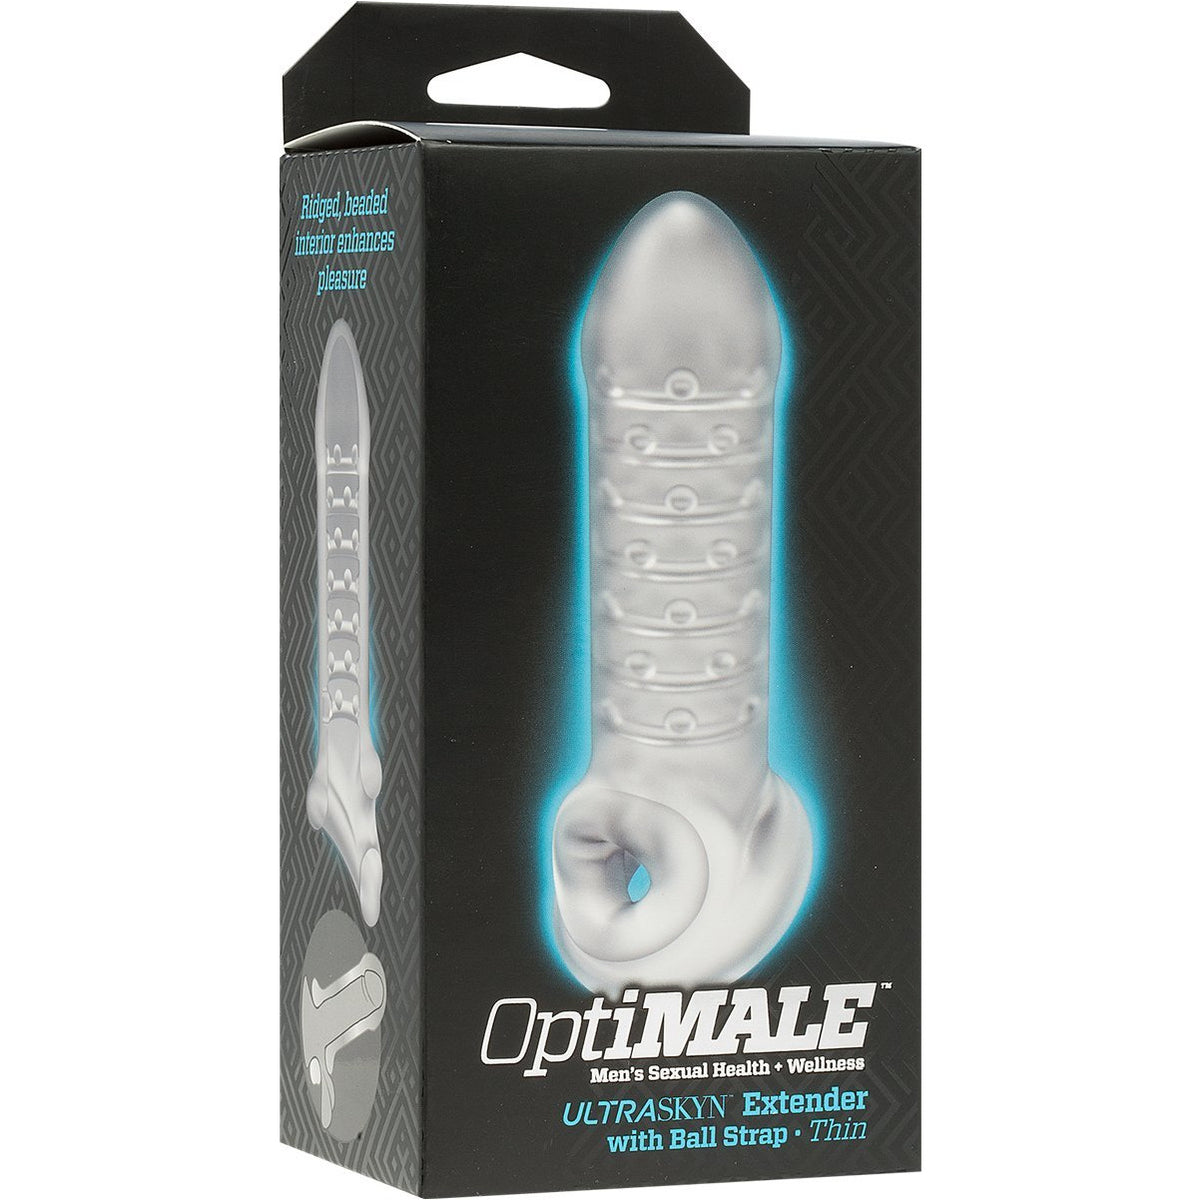 Doc Johnson OptiMALE – Penis Extension with Ball Strap – Thin